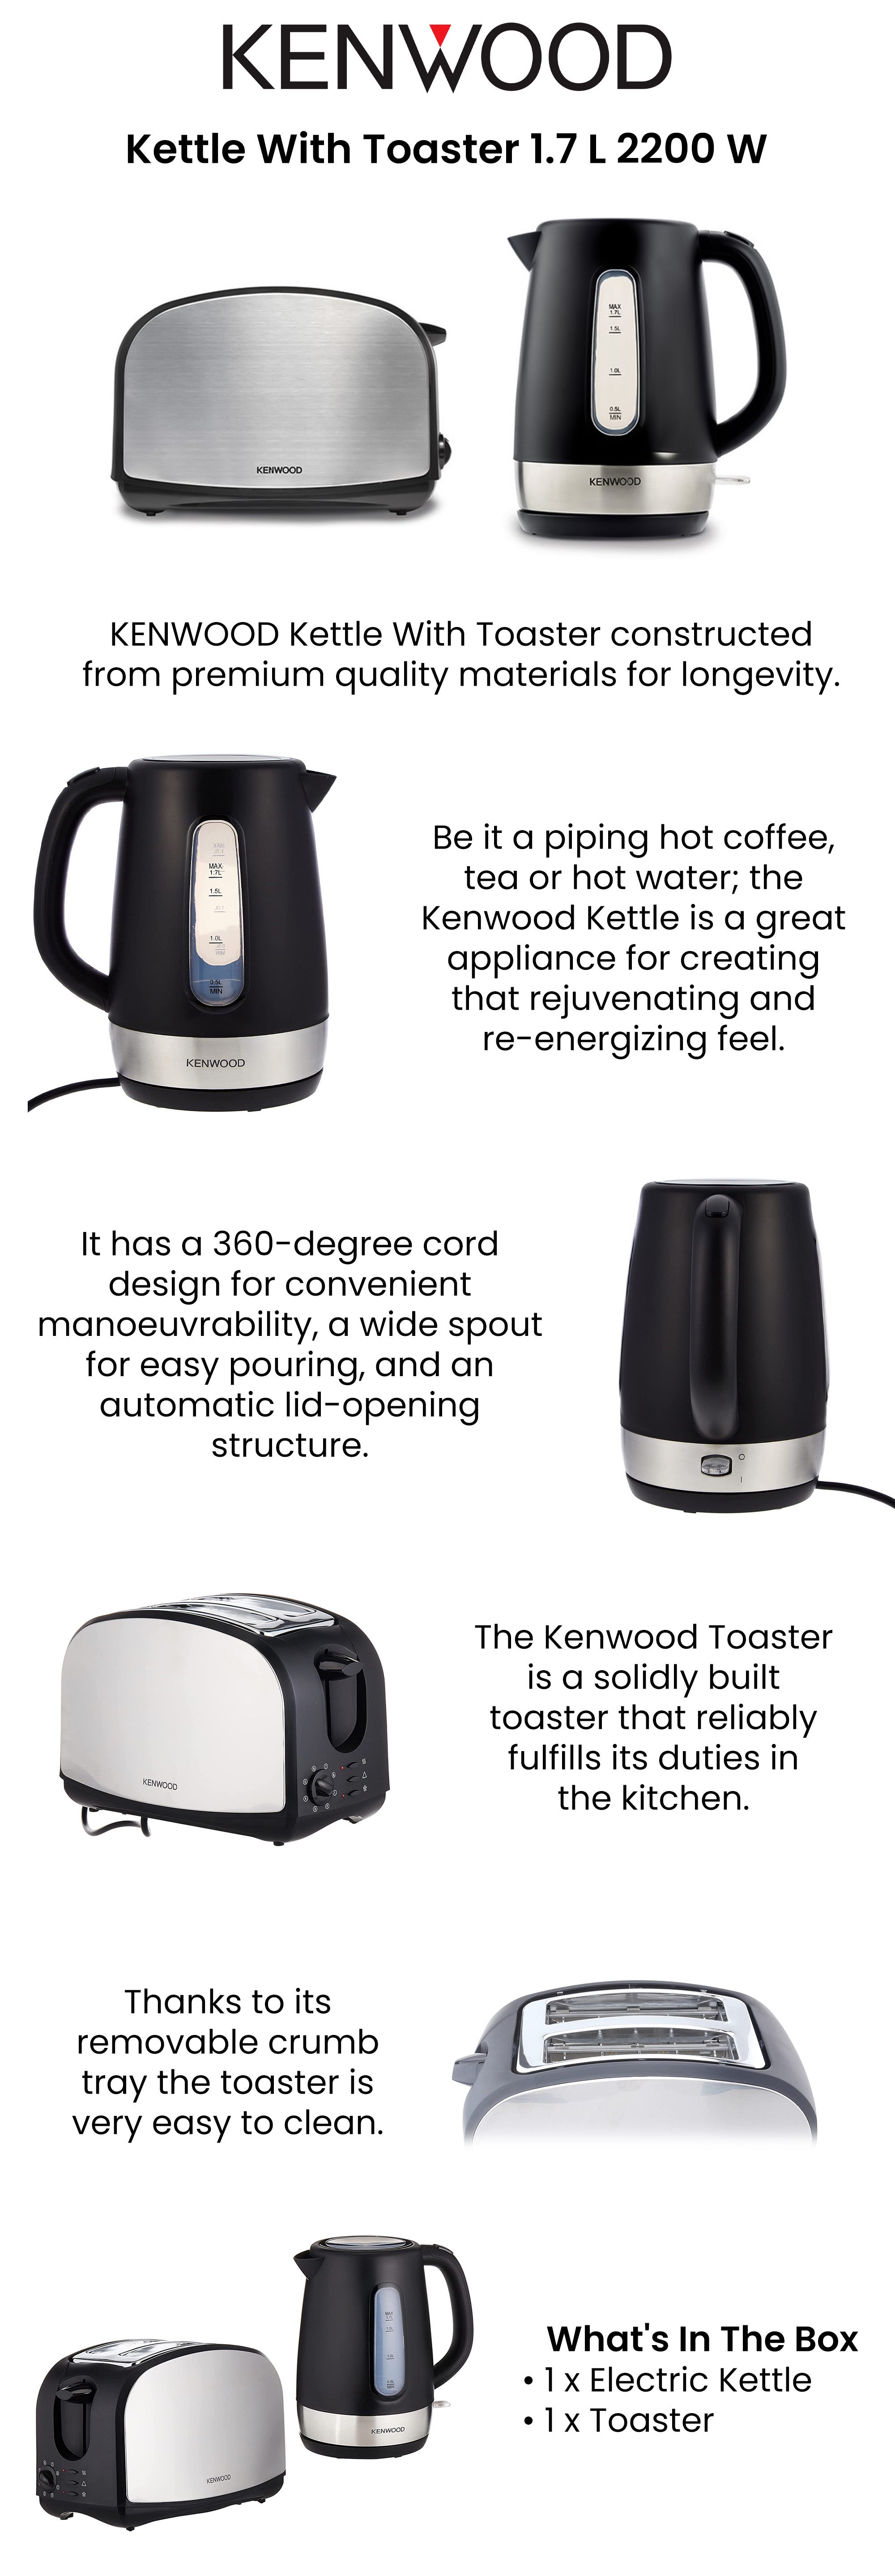 Bundle Breakfast Set With 1.7L Electric Kettle And 2 Slice Bread Toaster MPM02.000BK 2200 W Tcm01.aobk - Zjp01.aobk Silver/Black